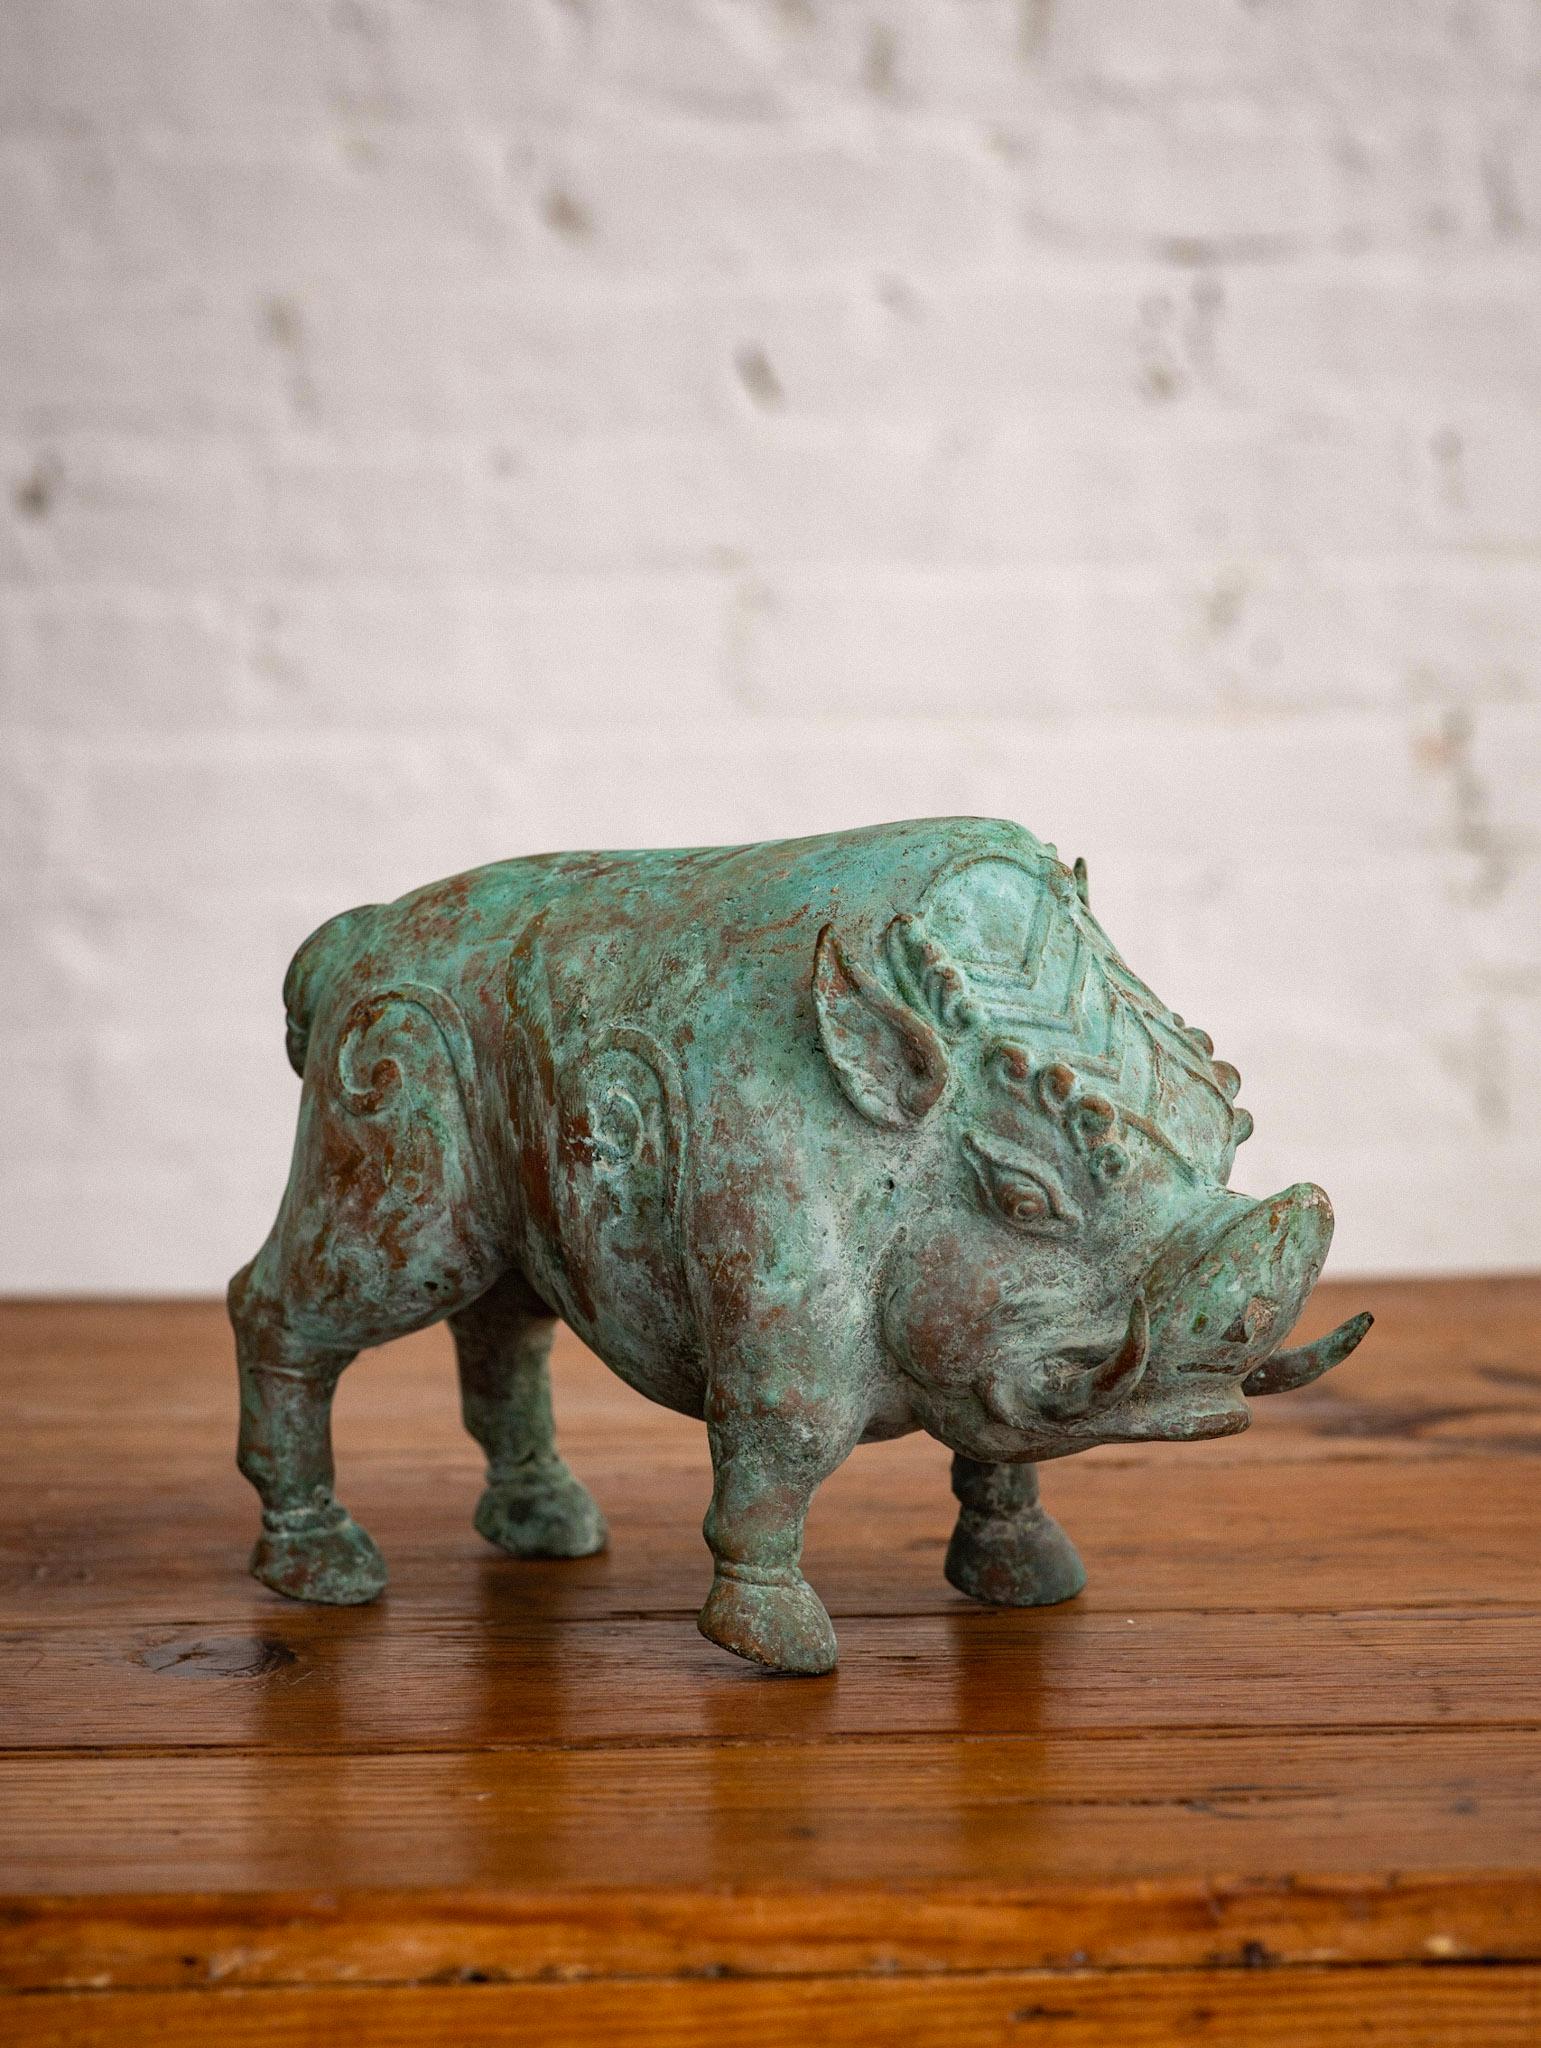 Figurative decorated boar objet d’art. Made of verdigris copper. Attributed to being Chinese based on style and subject.